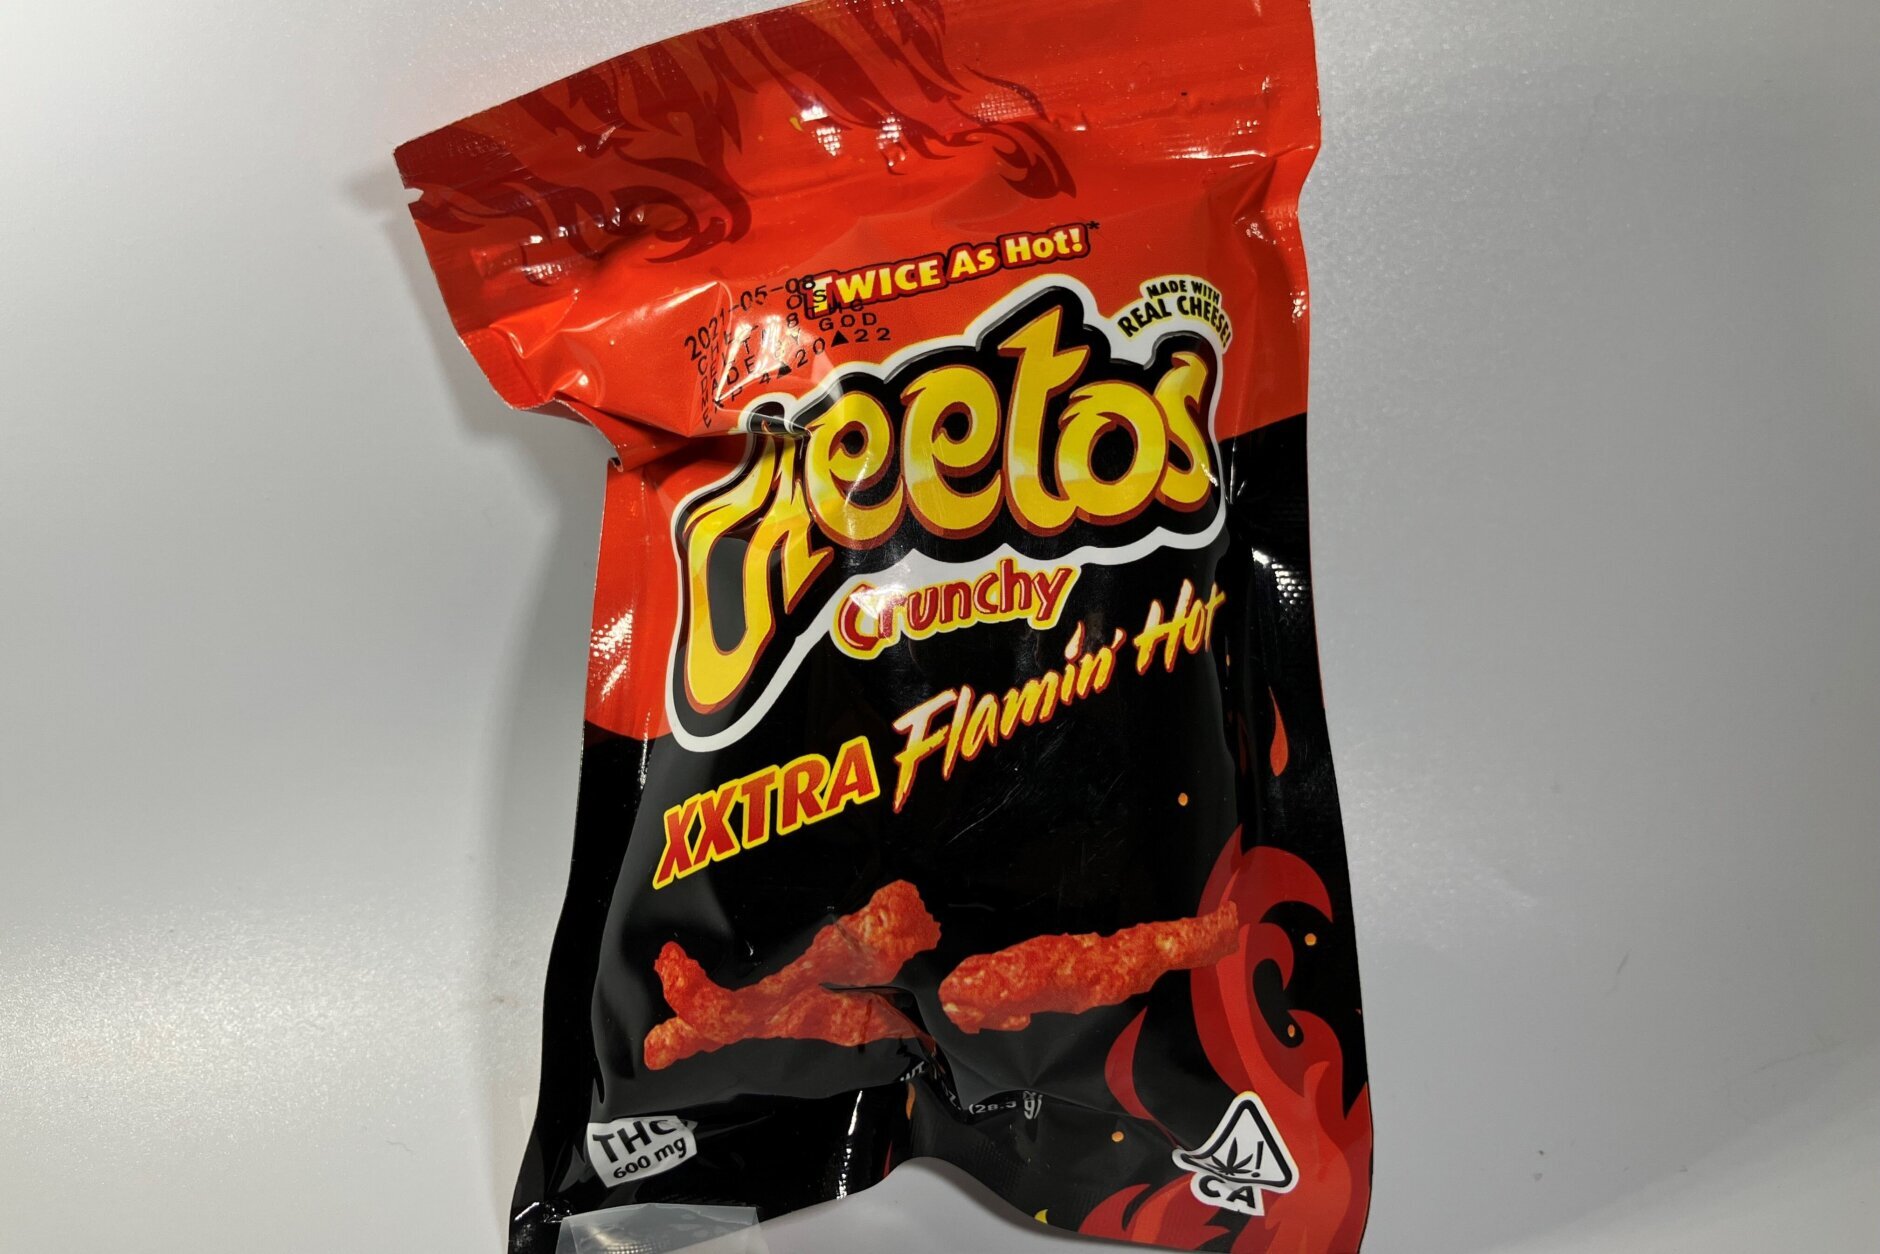 A package of snack food containing THC that resembles a bag of "Cheetos."